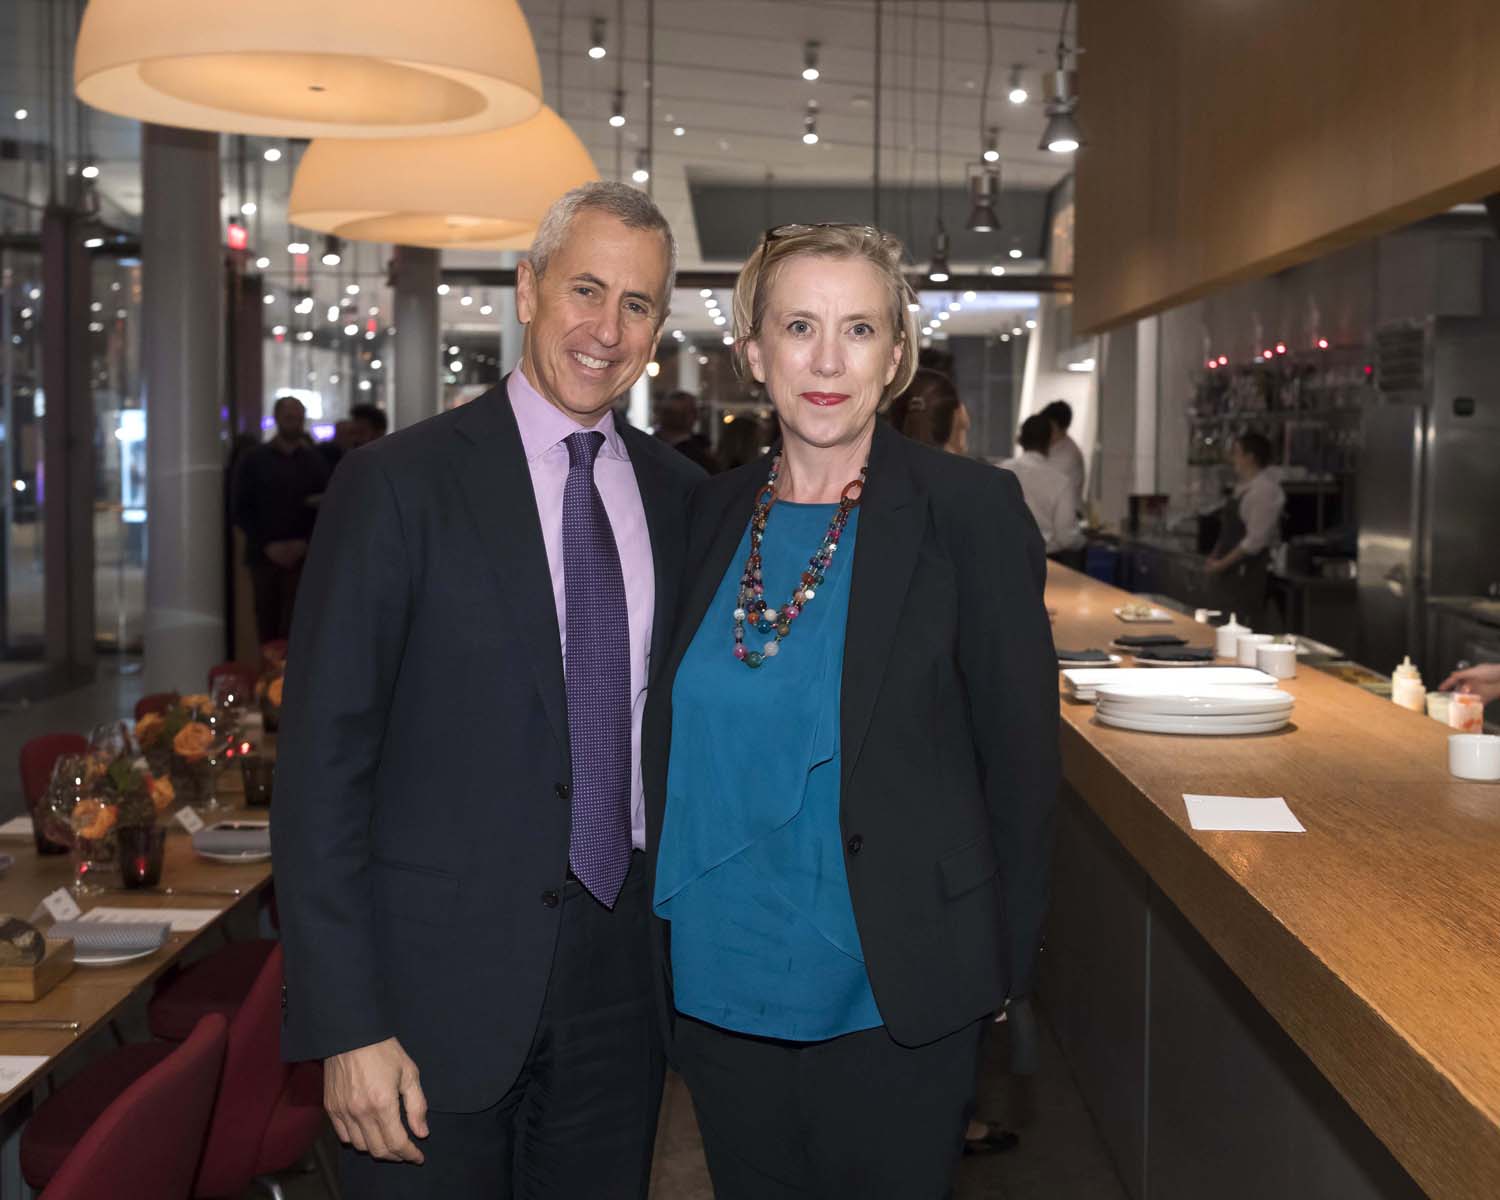 NYC Food Photographer Untitled Danny Meyer and City Harvest